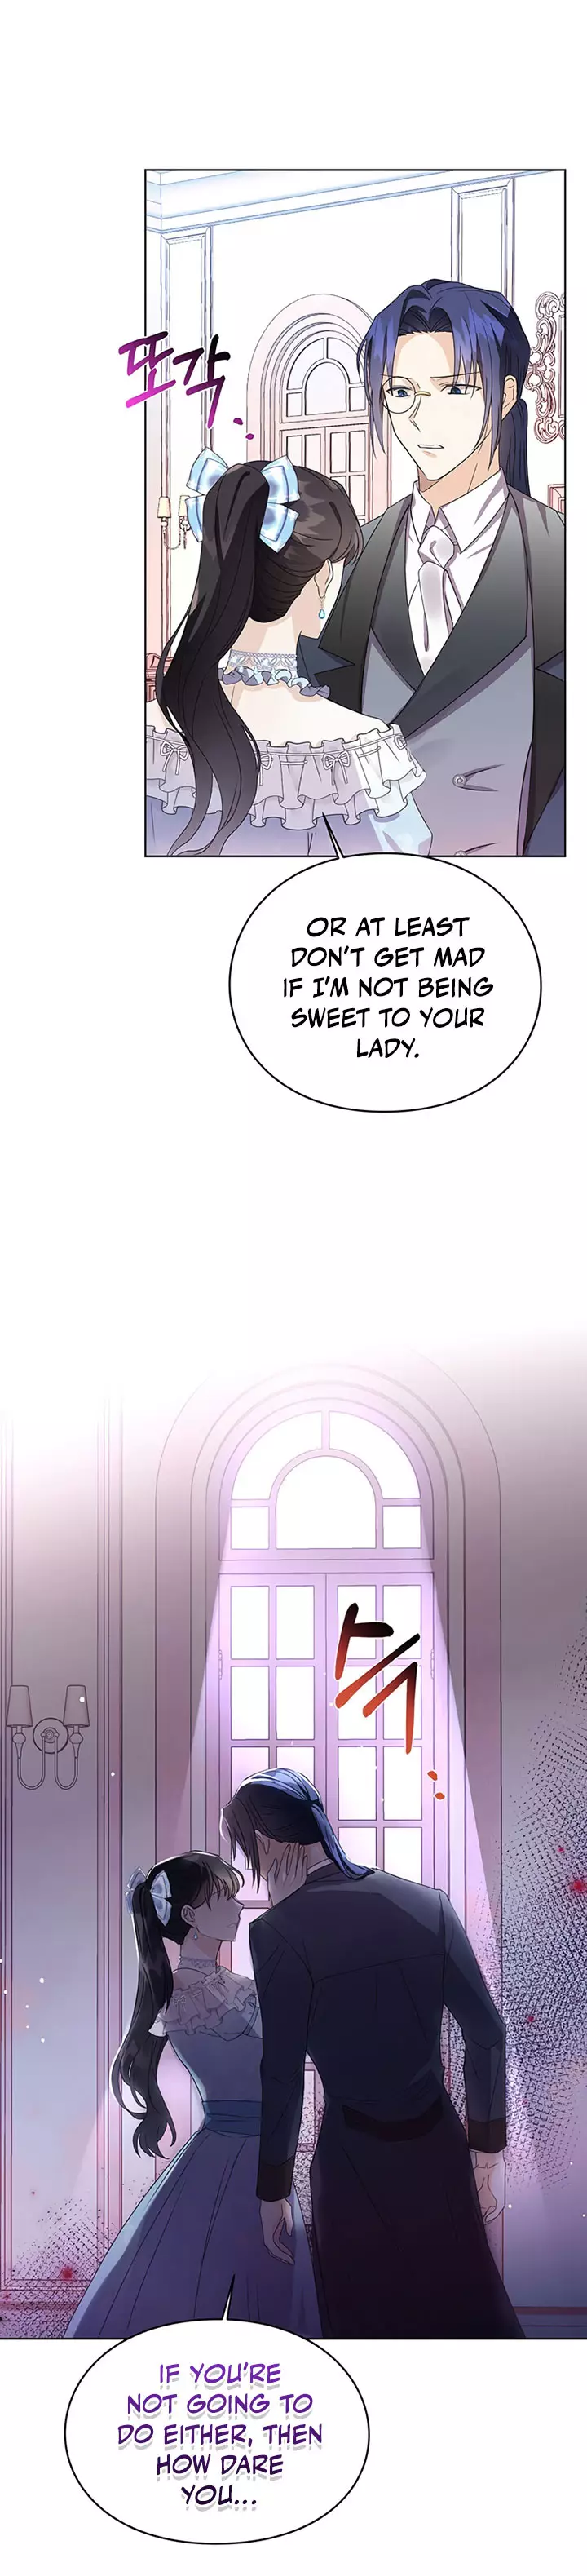 The Bad Ending Of The Otome Game - 14 page 4-e402b4e3